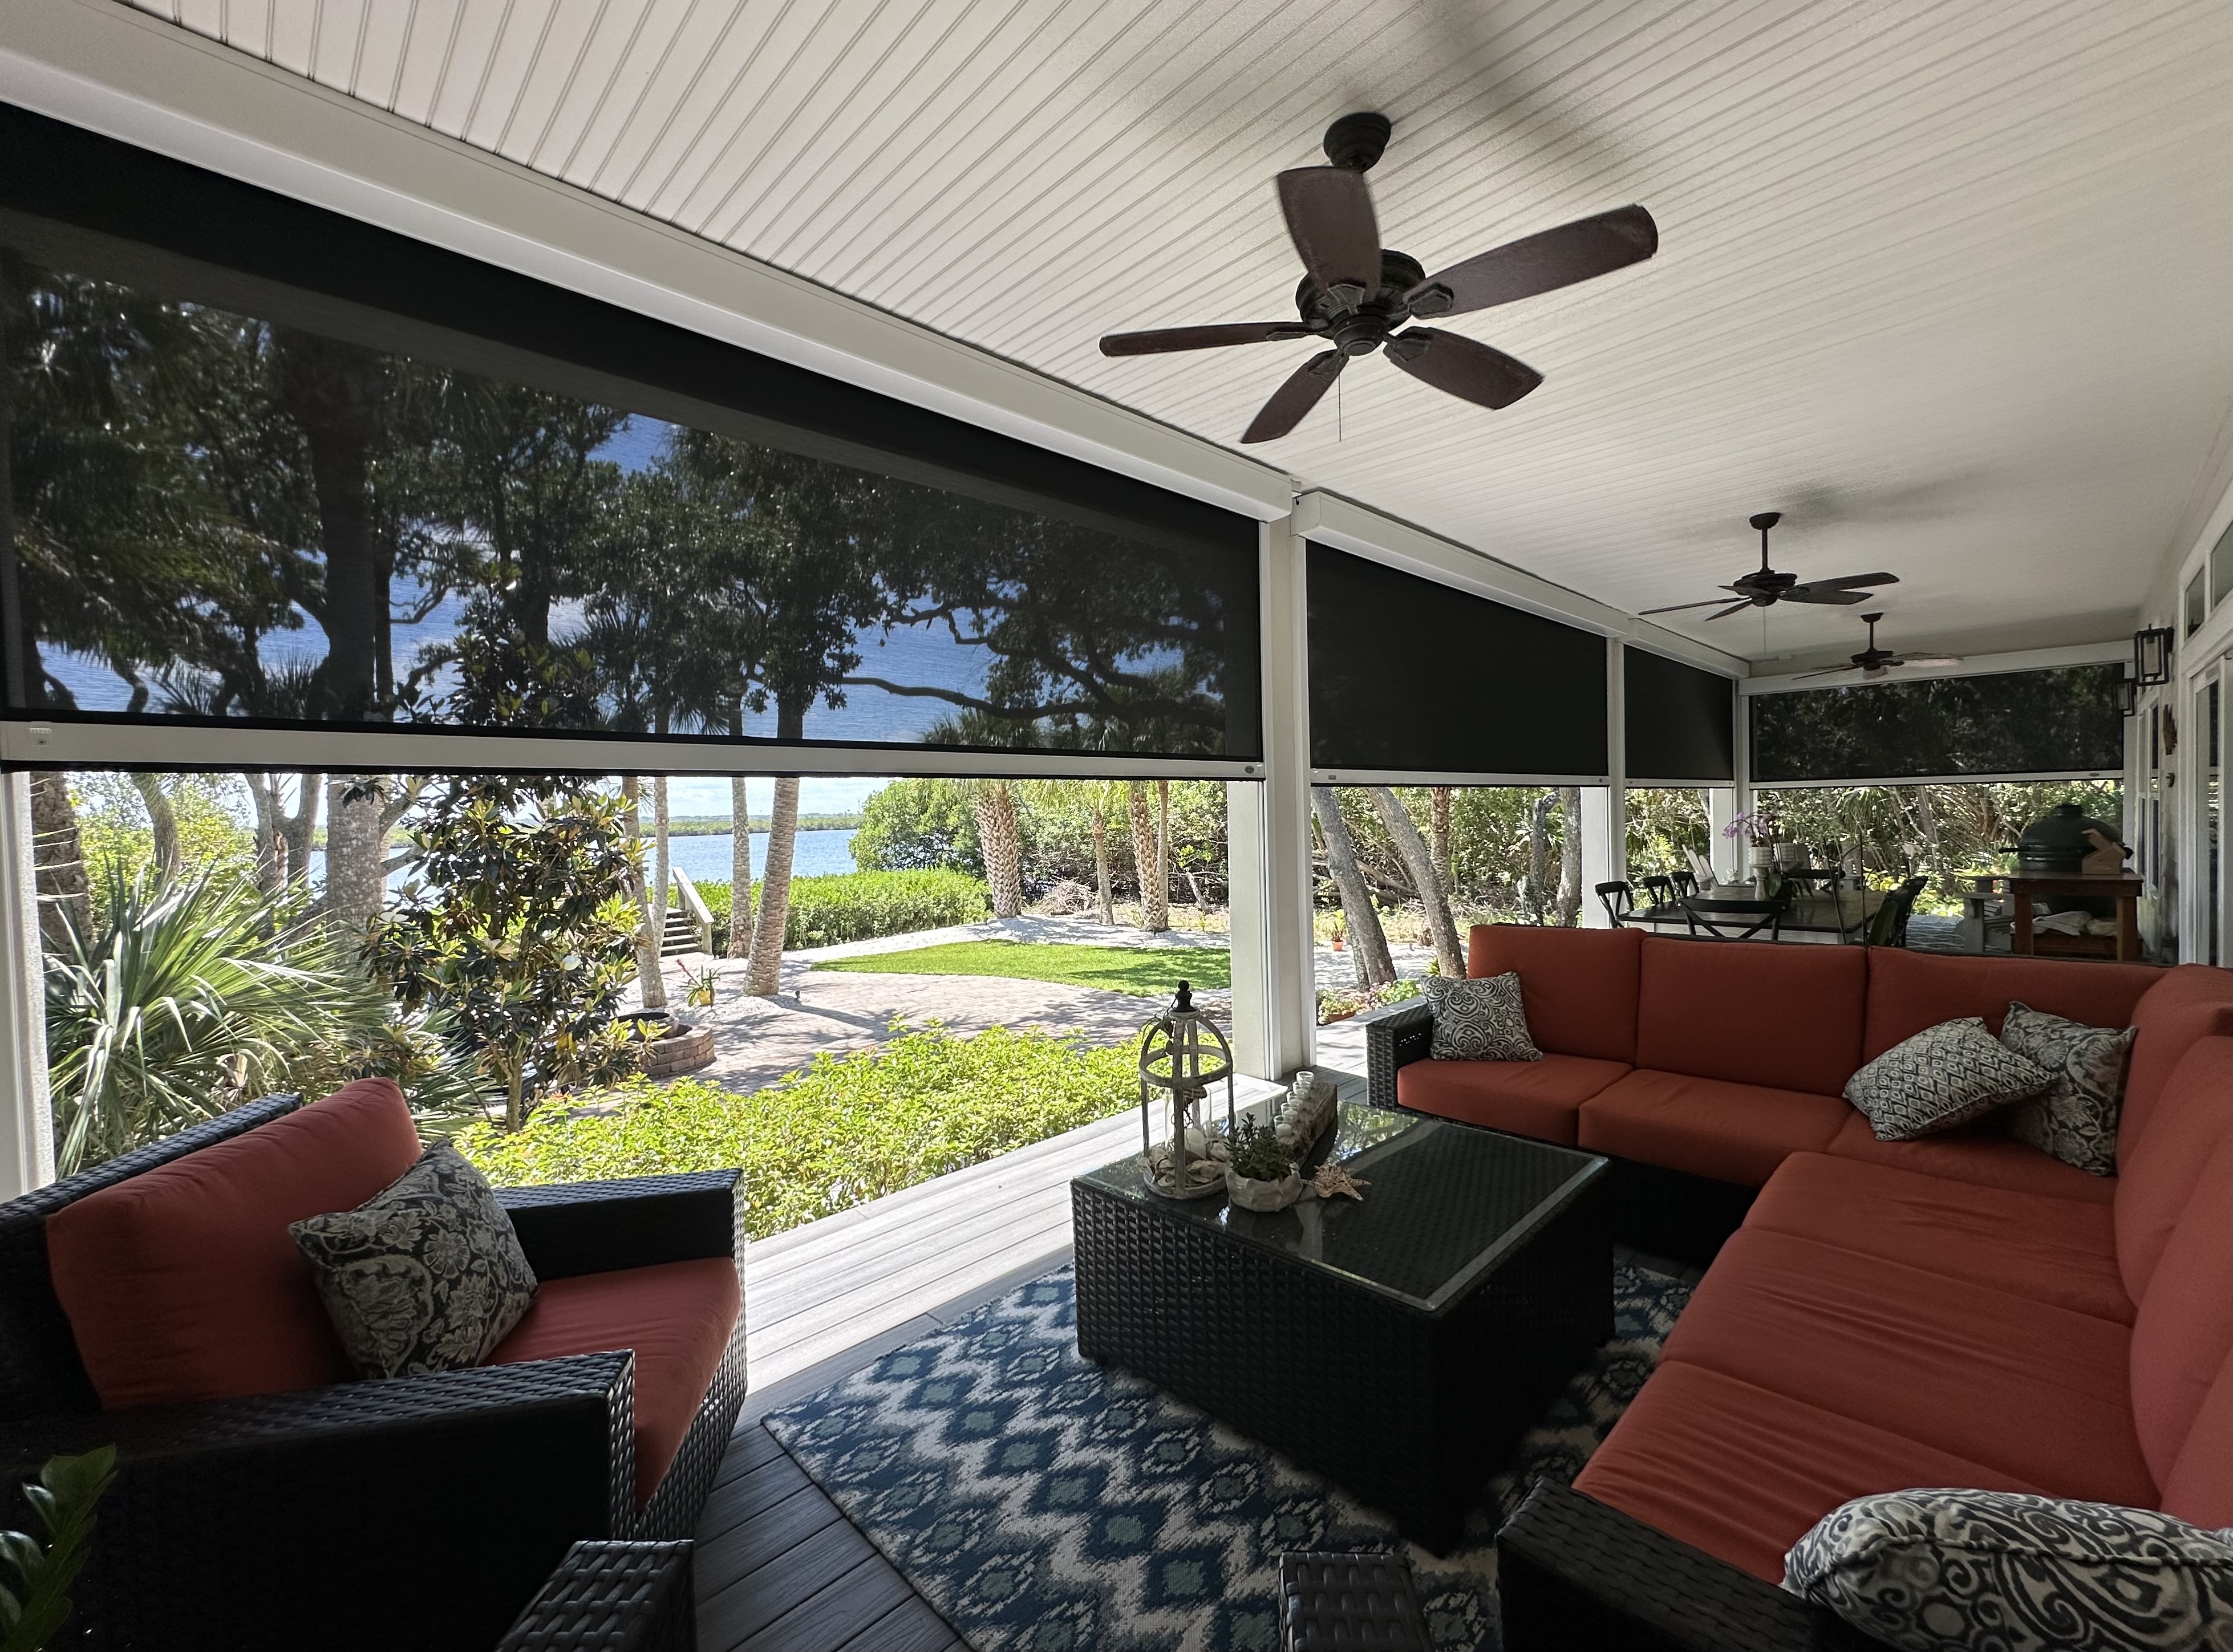 A serene screened-in porch with hurricane protections and a waterfront view, featuring cozy seating with red cushions, ceiling fans, and a patterned blue rug, surrounded by lush greenery outside.